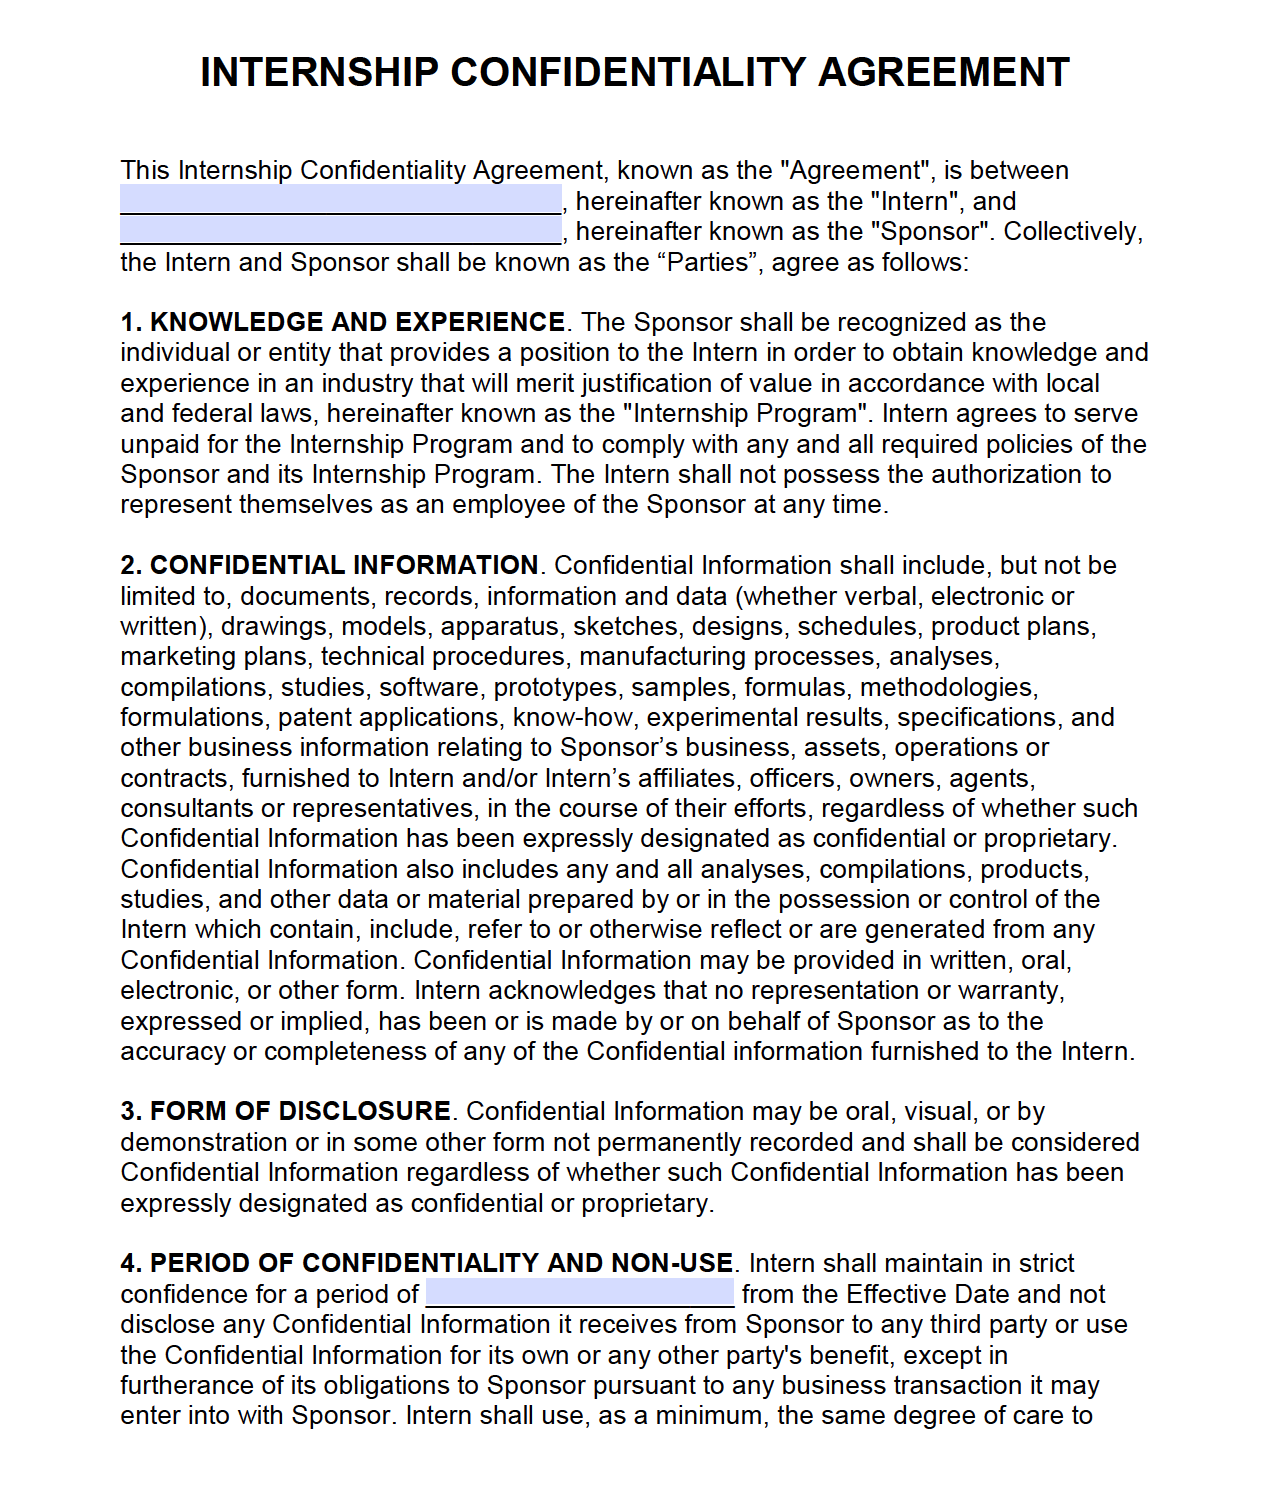 Free Intern Non-Disclosure Agreement (NDA) – PDF – Word  PDF Within therapy confidentiality agreement template